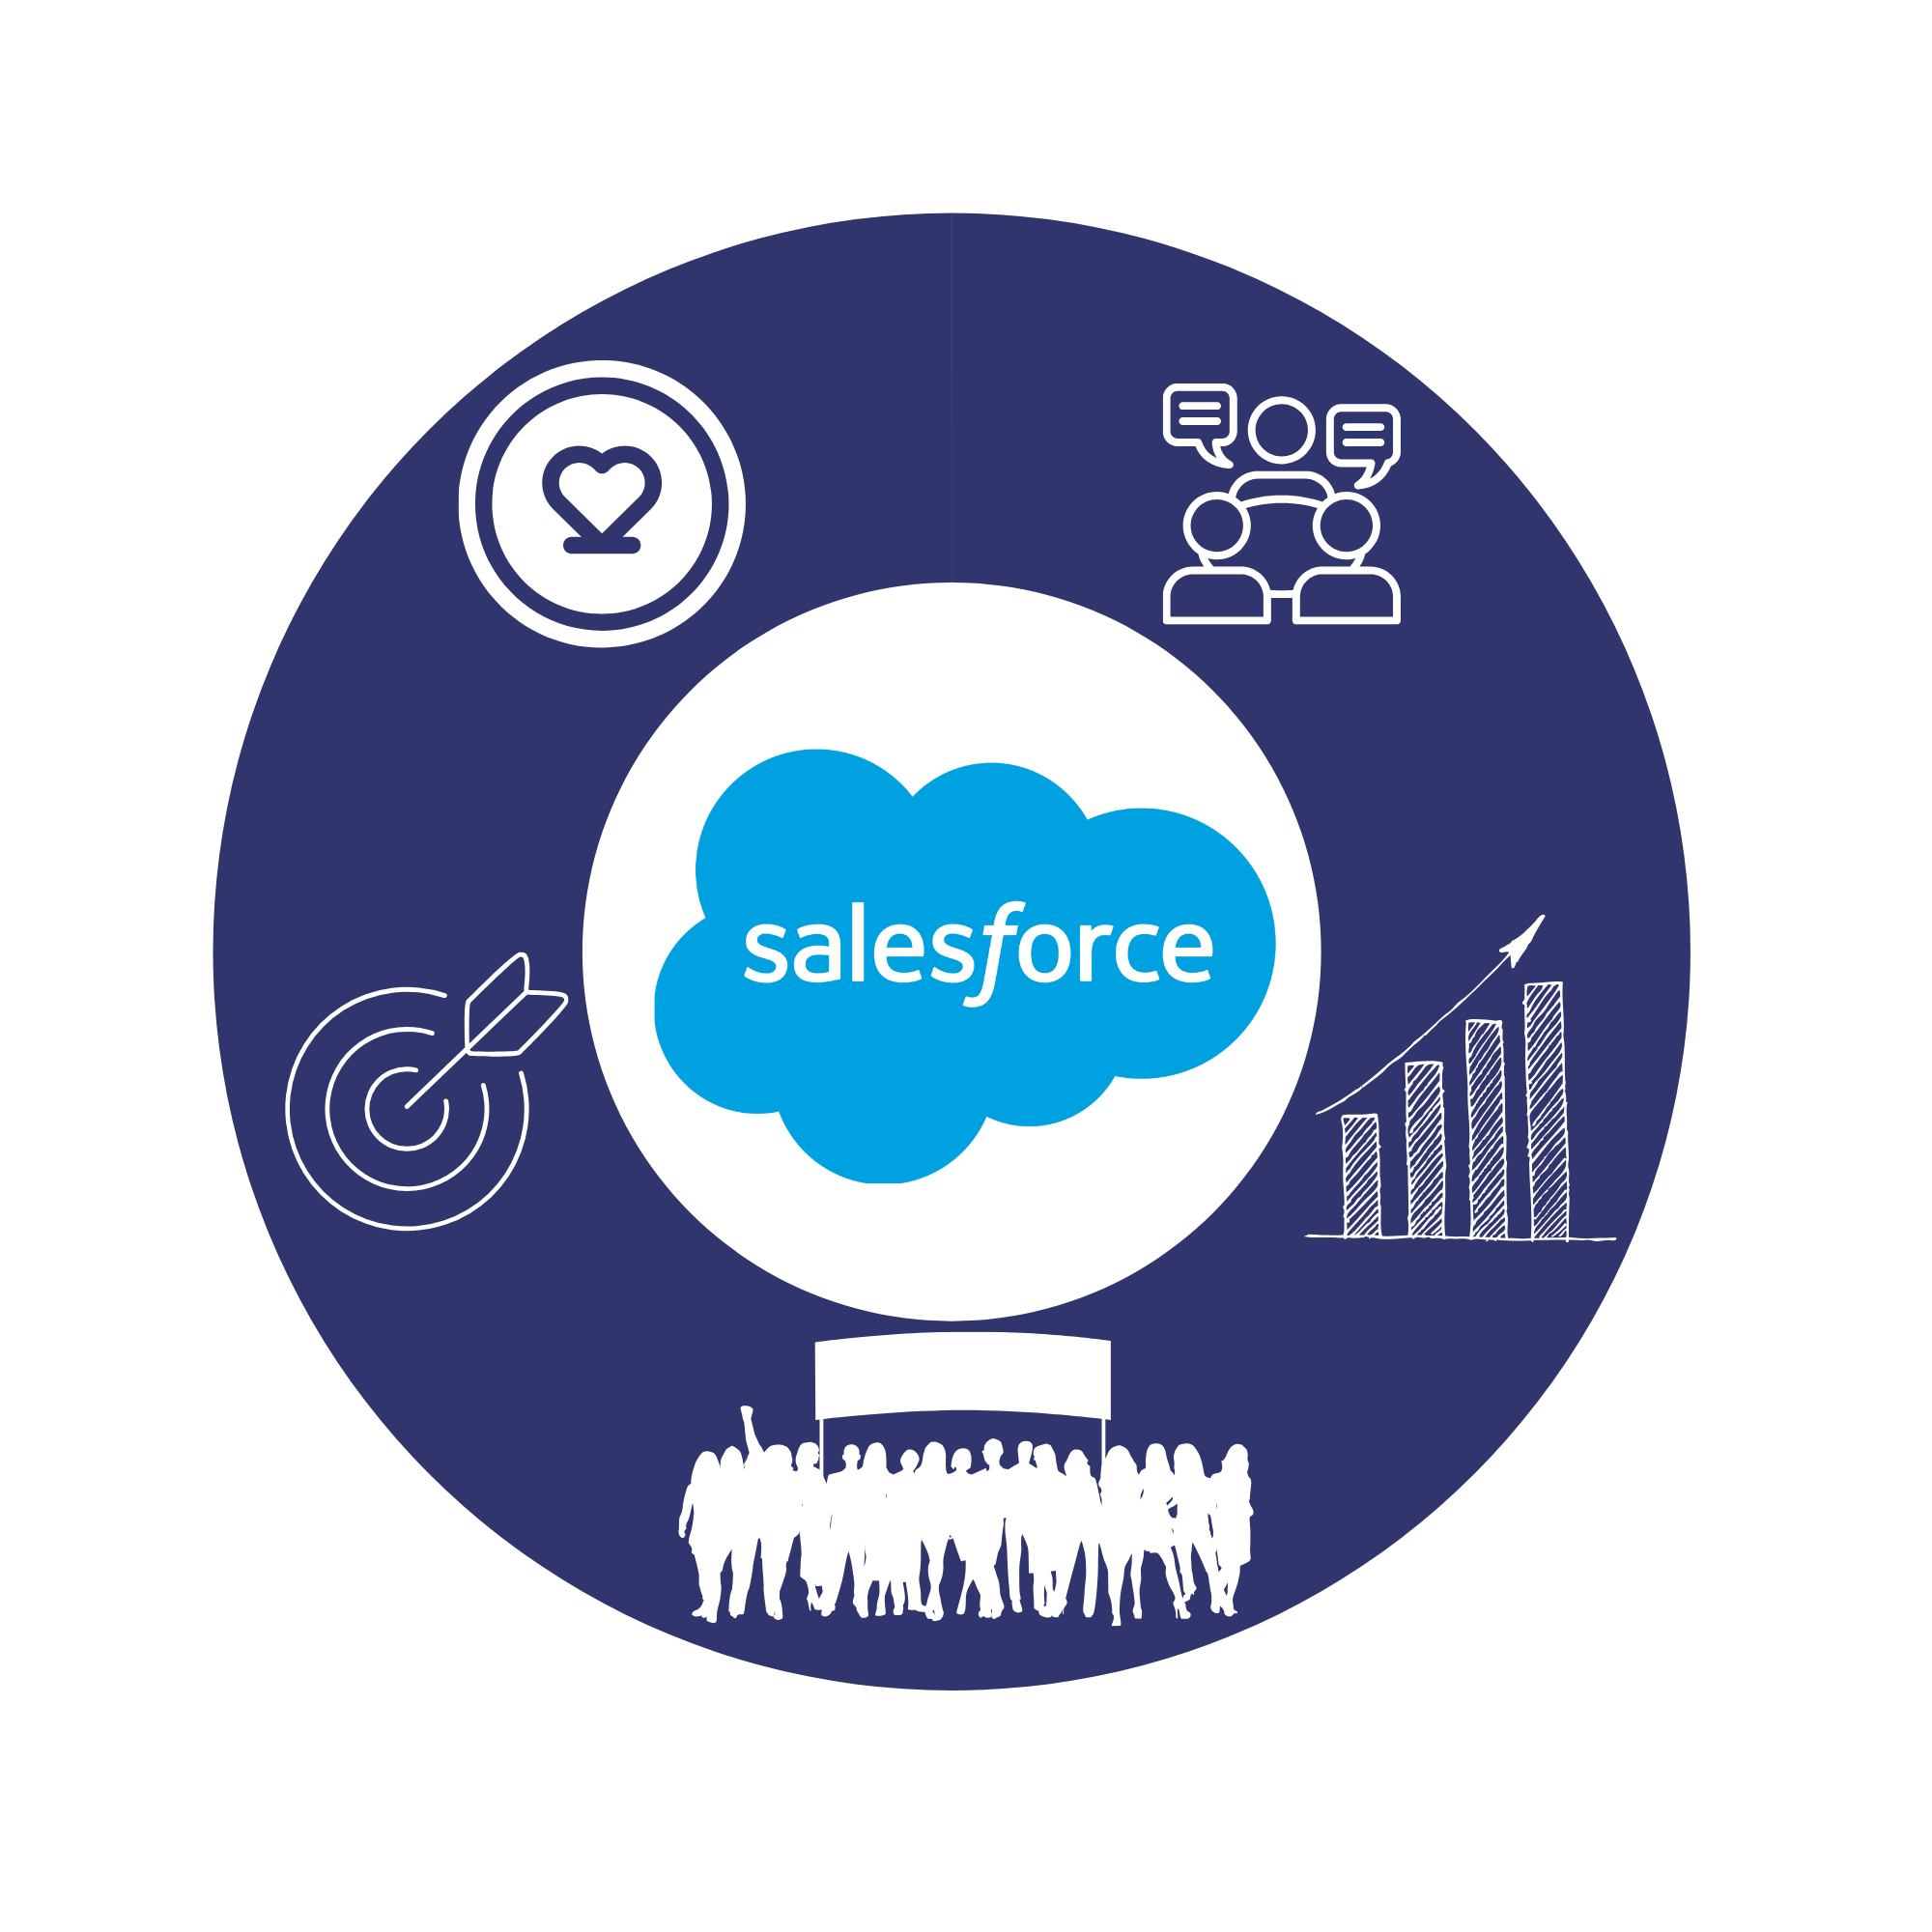 Drive Nonprofit Success With Salesforce Solutions image